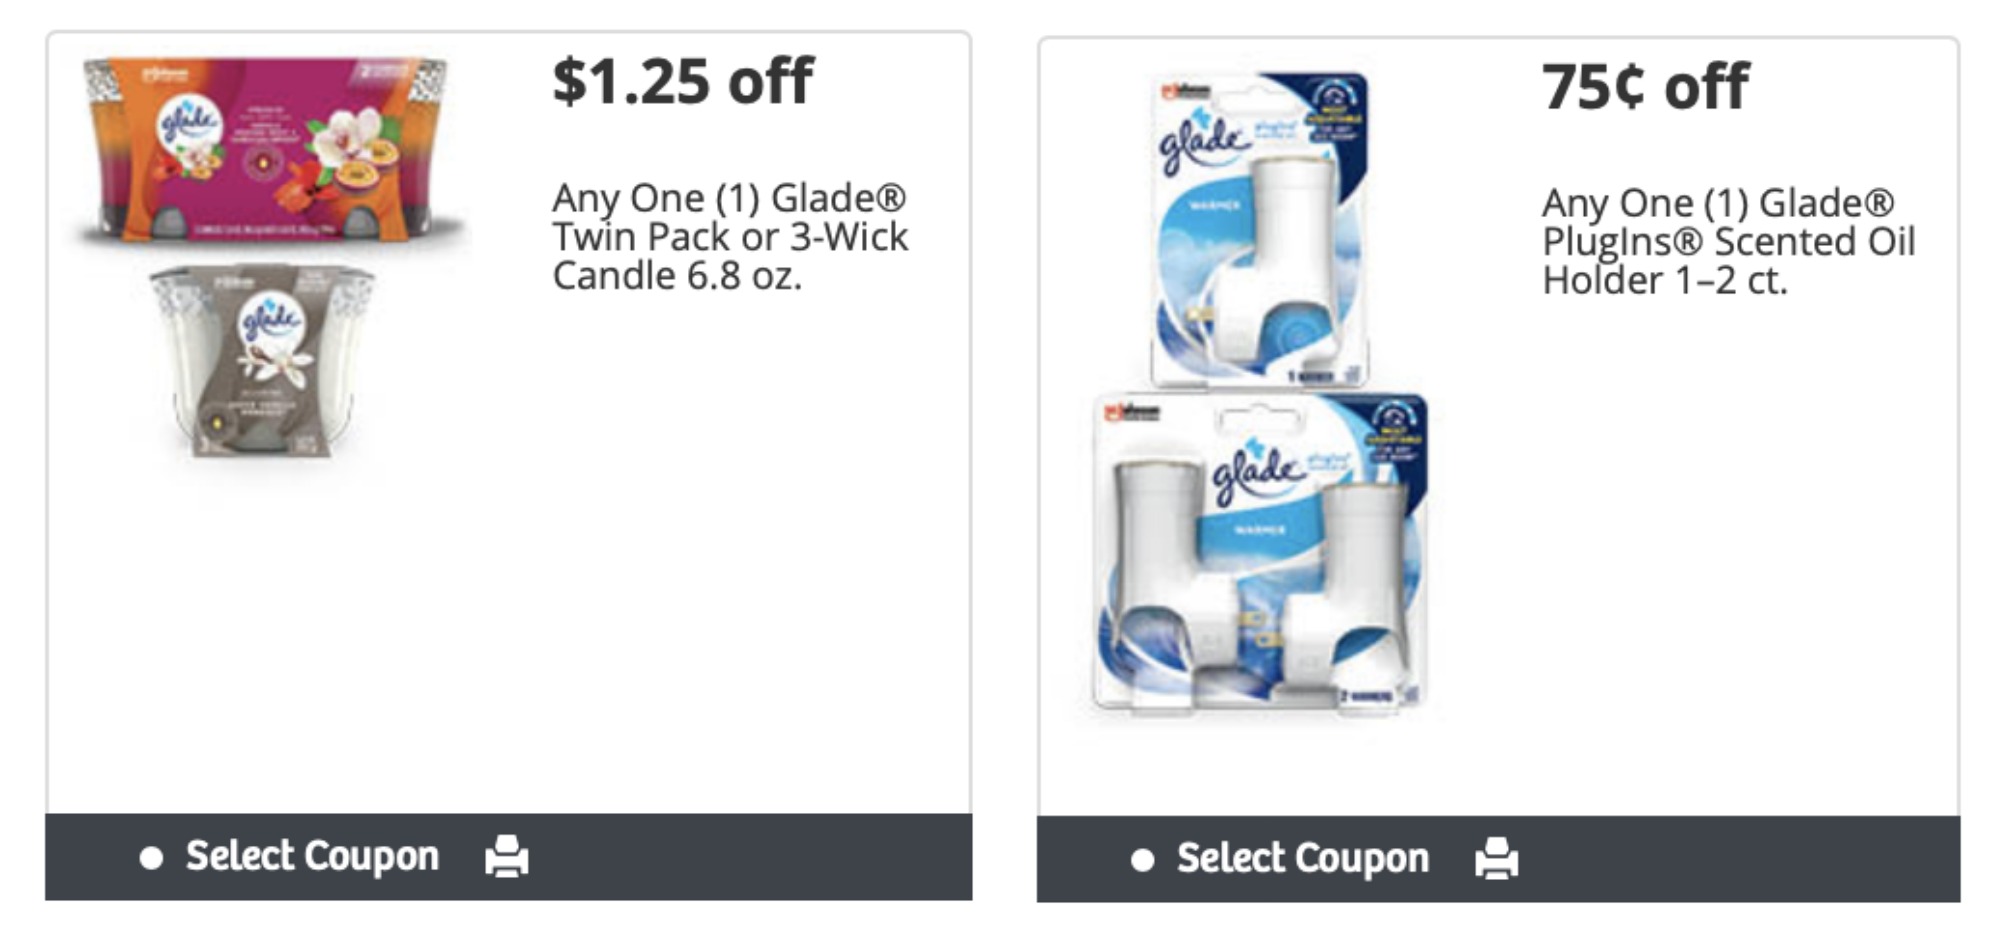 Get Savings On Glade® Products In The Spring Savings Booklets - Use The Coupons To Try The Glade® Limited Edition Spring Collection on I Heart Publix